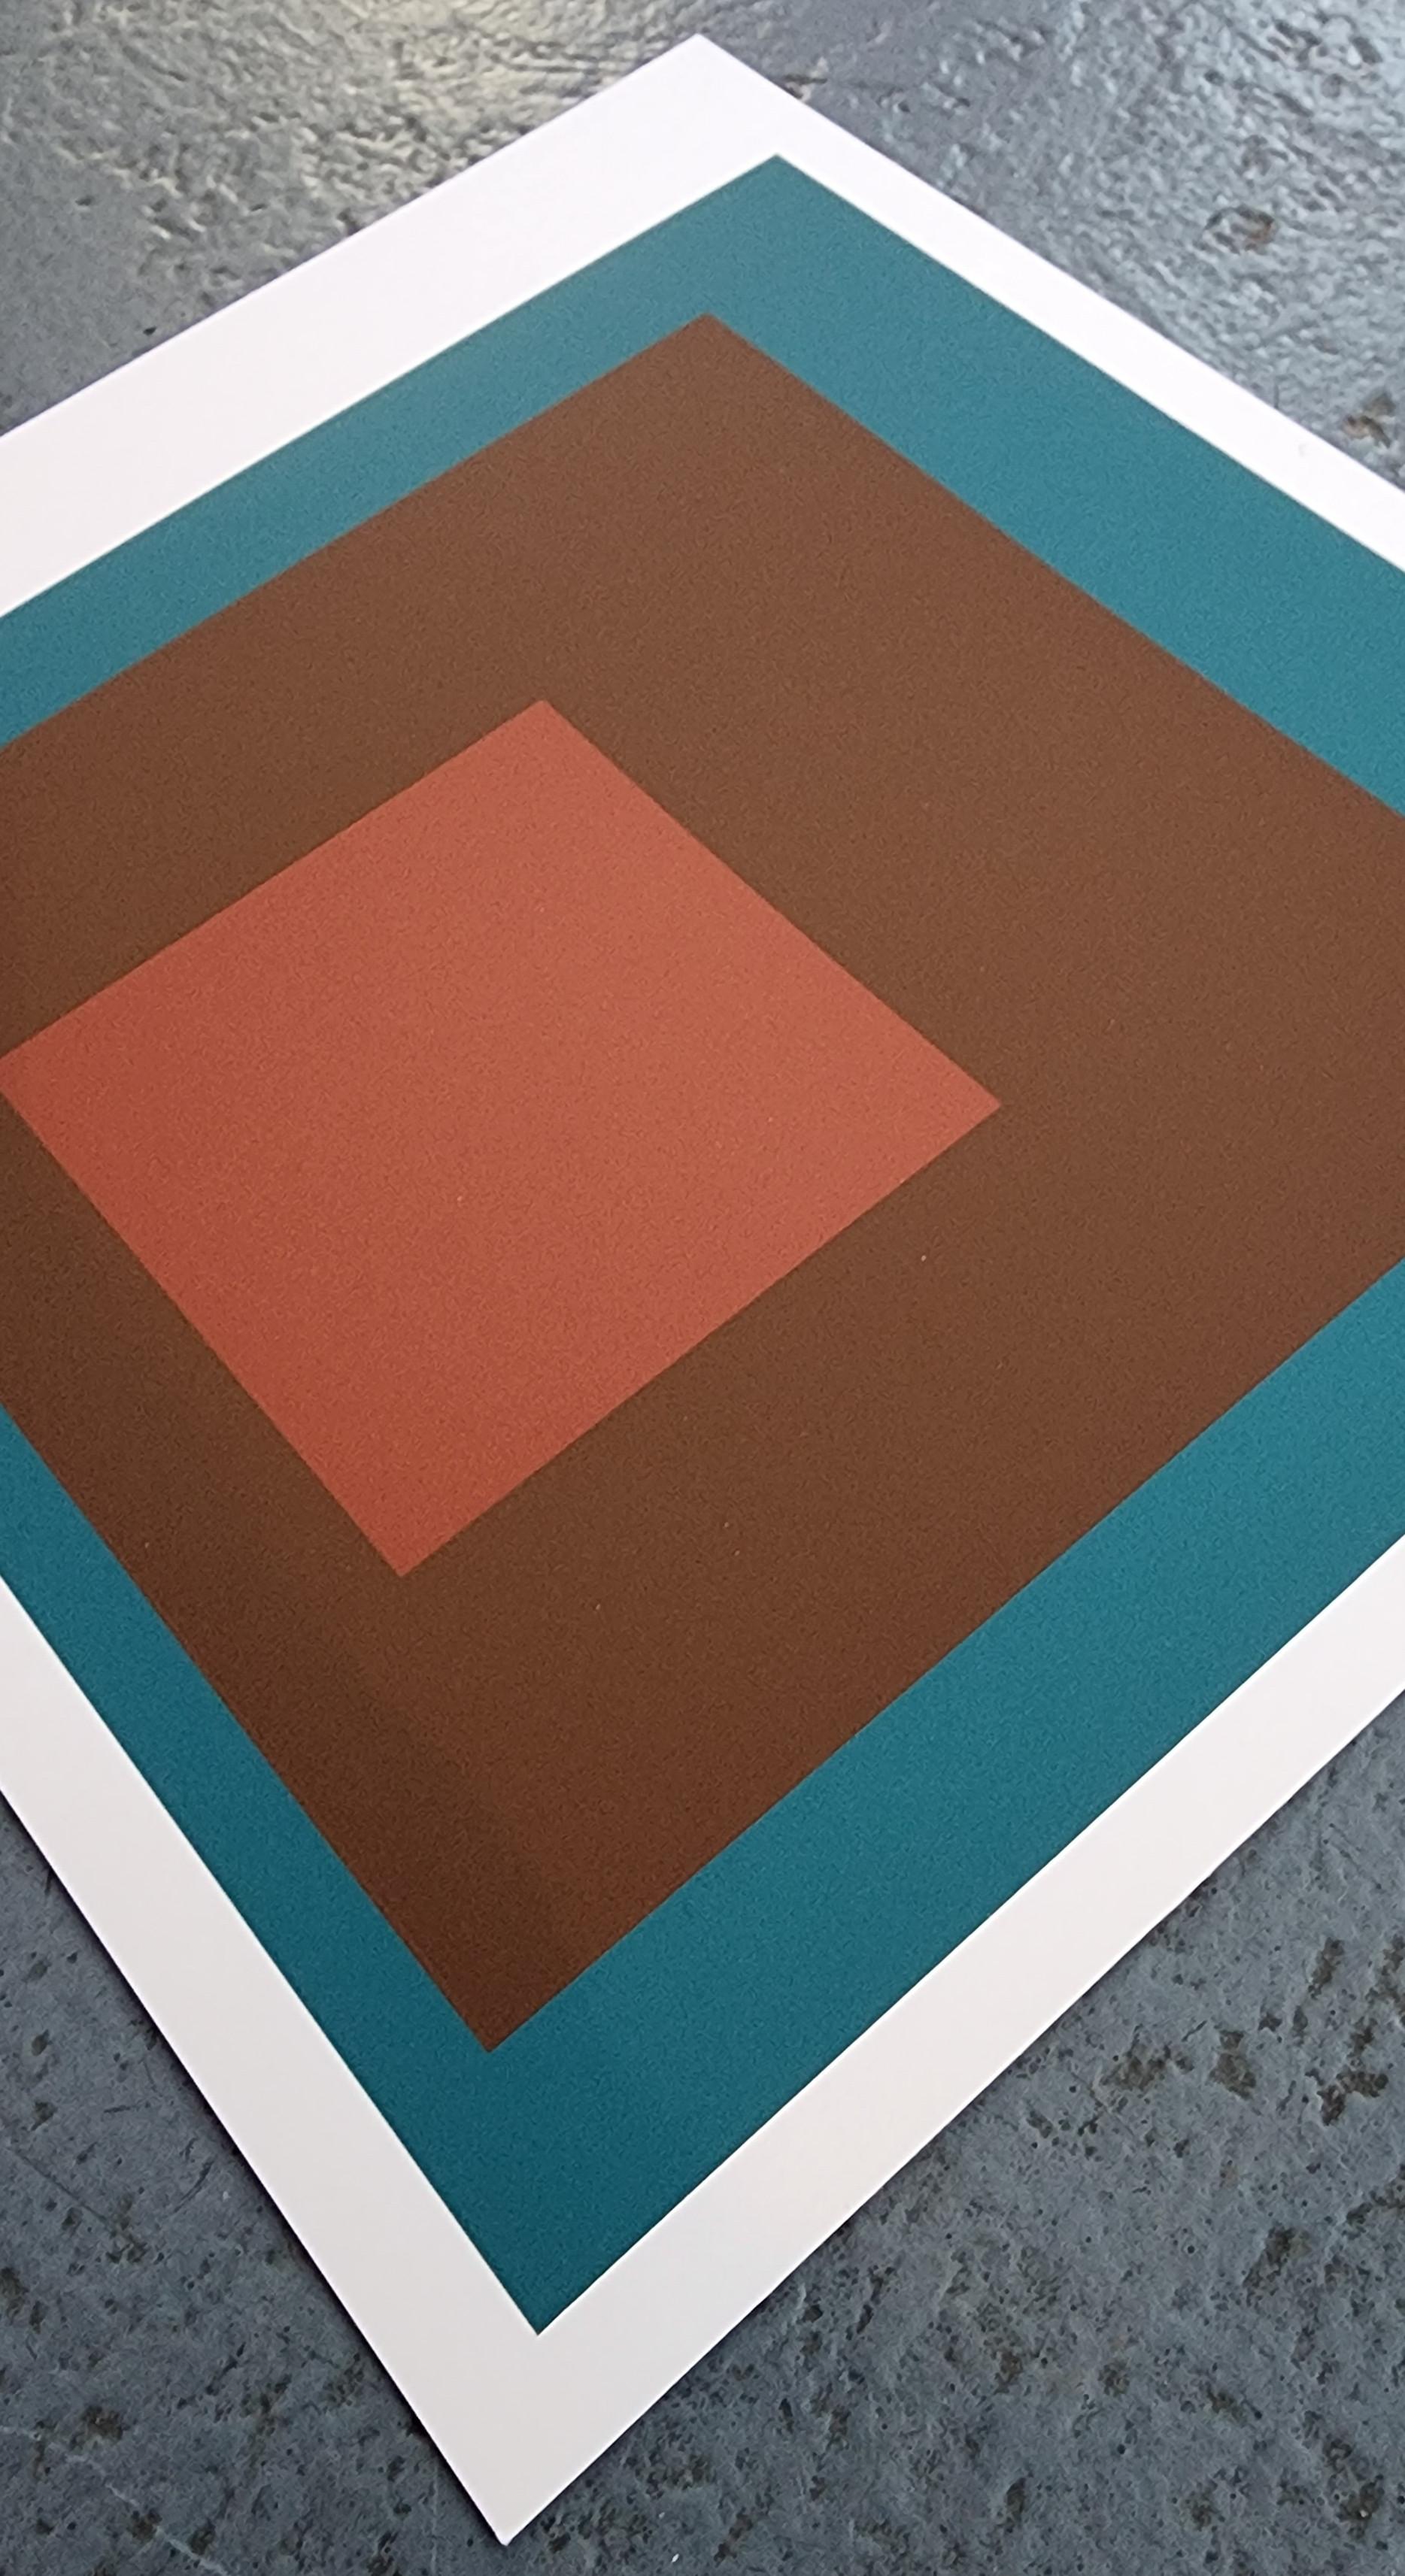 Josef Albers
Homage to the Square: At Night (from 